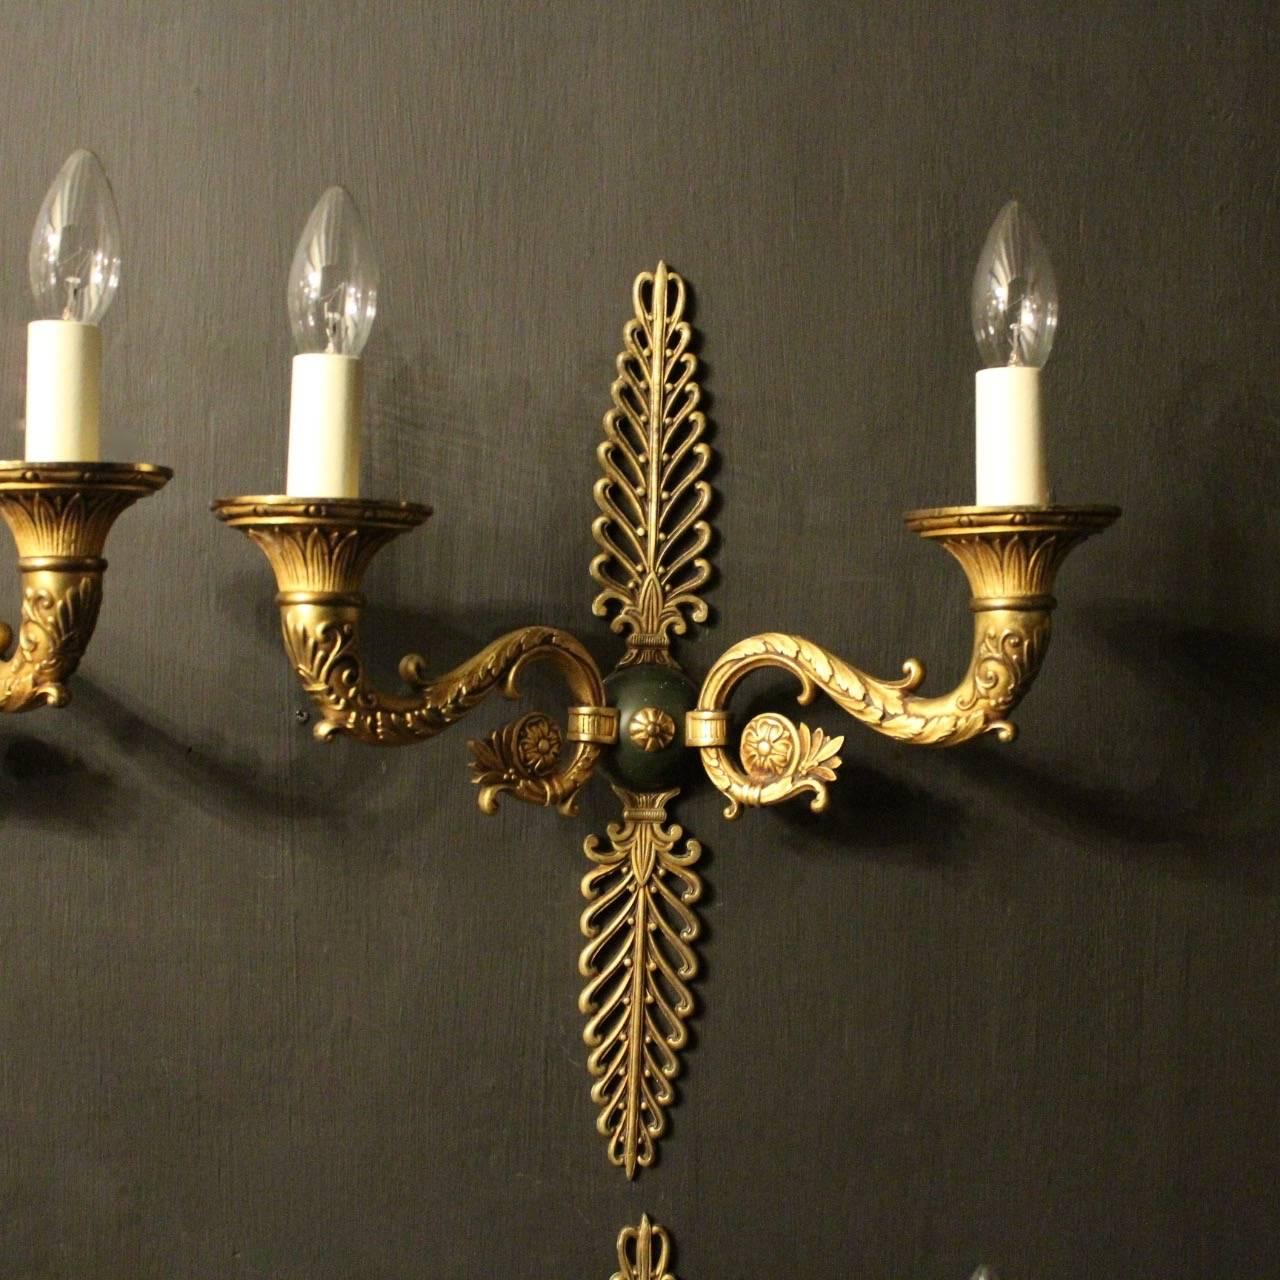 A lovely French set of four Empire gilded bronze and green enamelled twin arm antique wall lights, the tapering ornate scrolling arms with decorative etched candle sconces, issuing from a central ornate circular bulbous green enamelled backplate